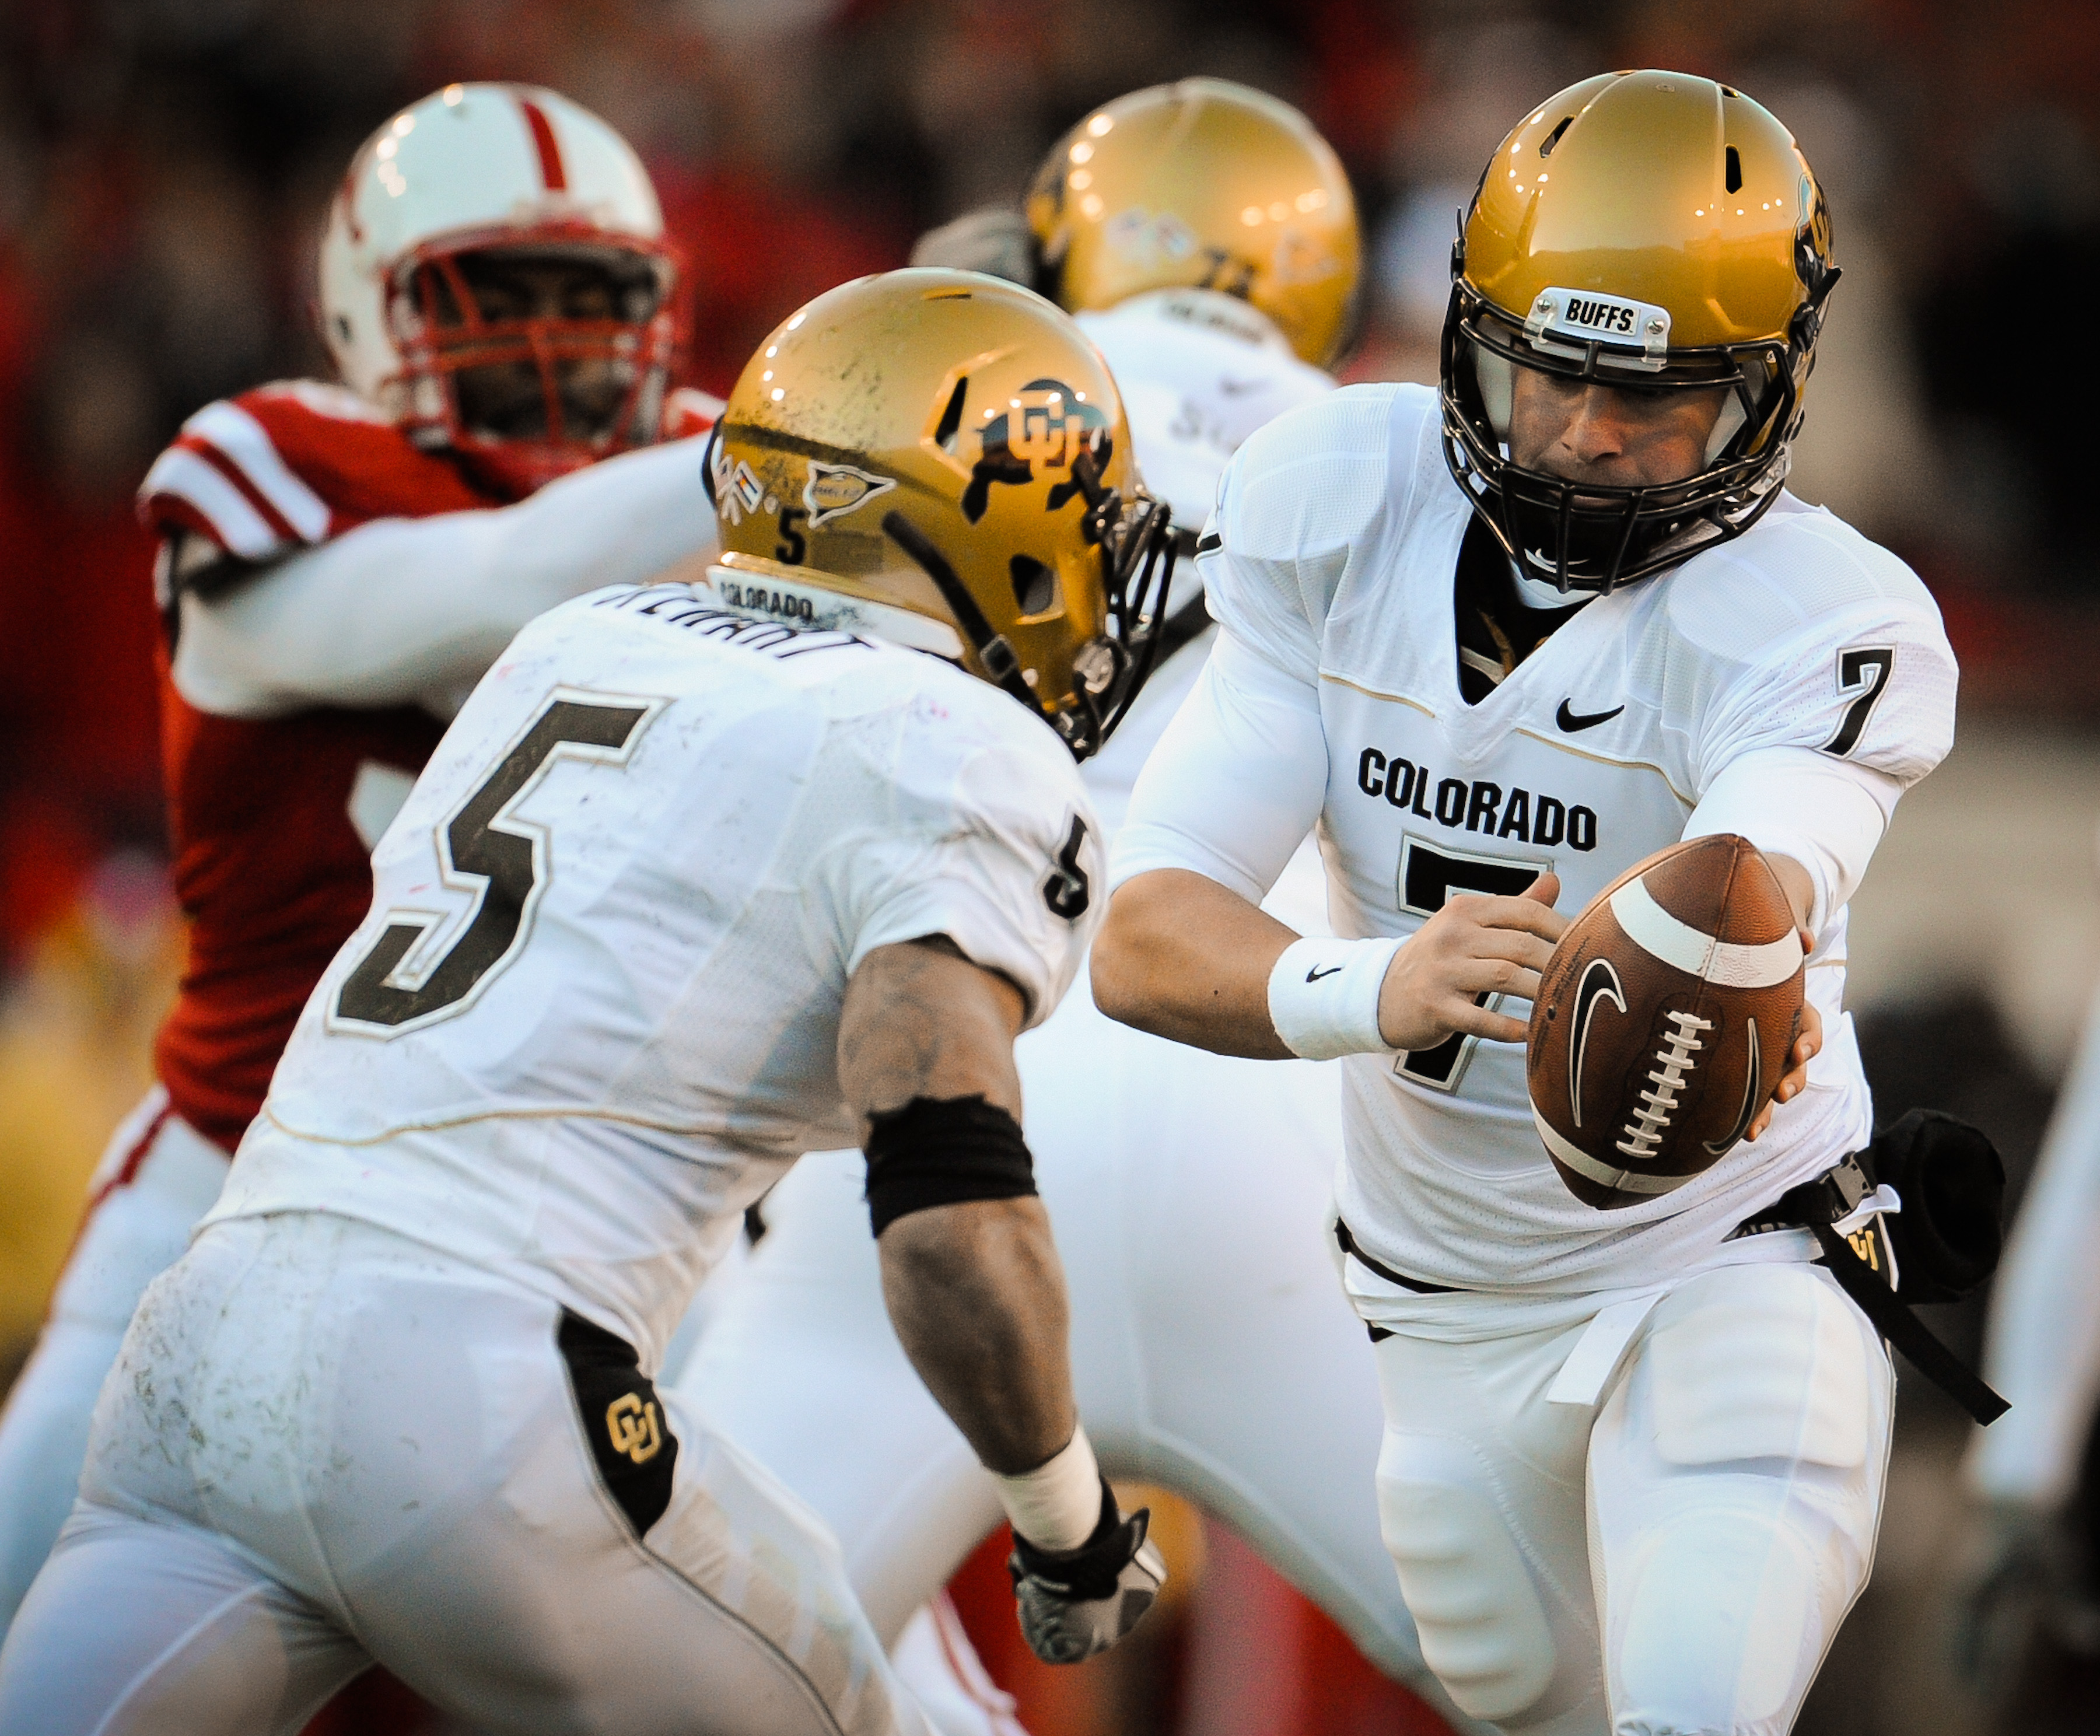 LINCOLN, NE - NOVEMBER 26: Cody Hawkins #7 hands the ball to teammate Rodney Stewart #5 of the Colorado Buffaloes during their game against the Colorado Buffaloes at Memorial Stadium on November 26, 2010 in Lincoln, Nebraska. Nebraska defeated Colorado 45